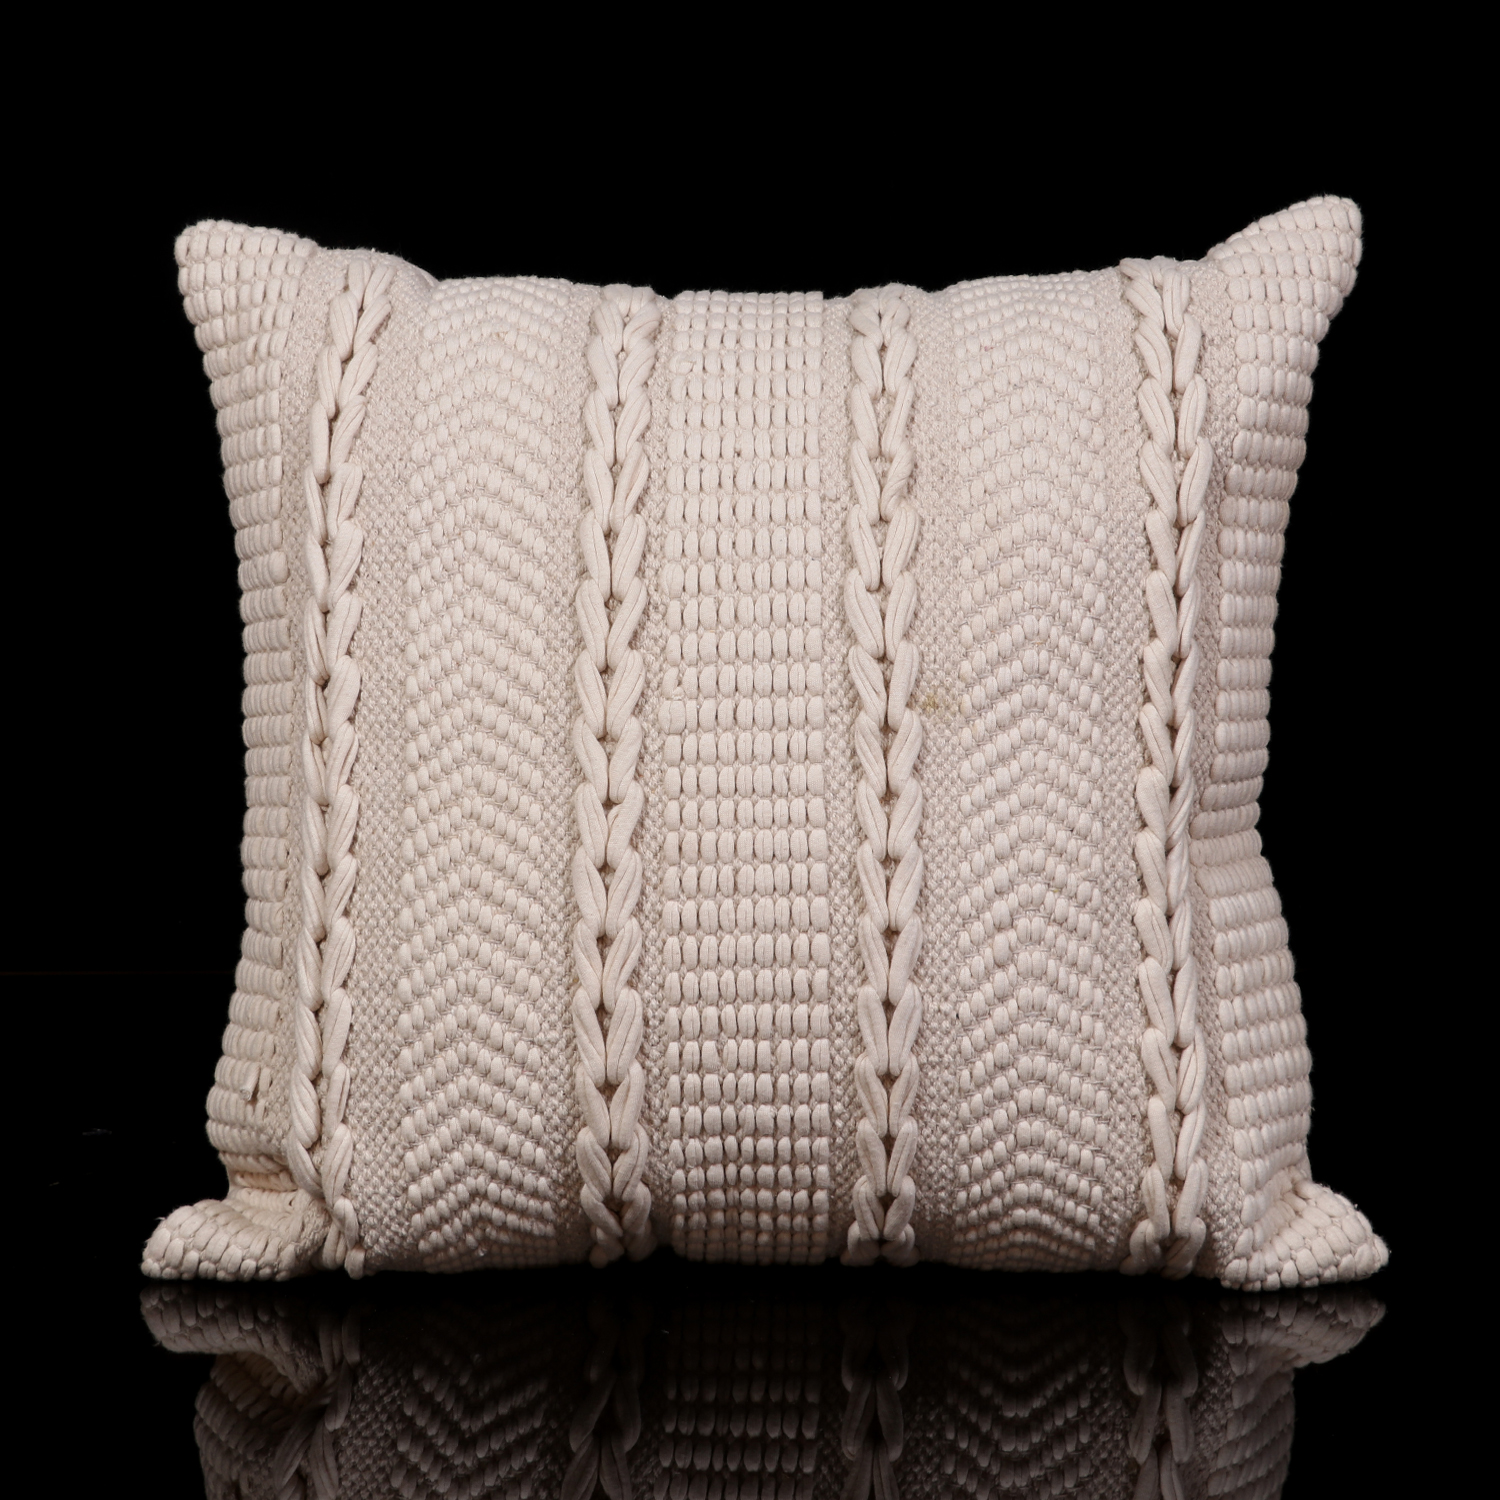 BRAIDED EMBELLISHED WOVEN PILLOW